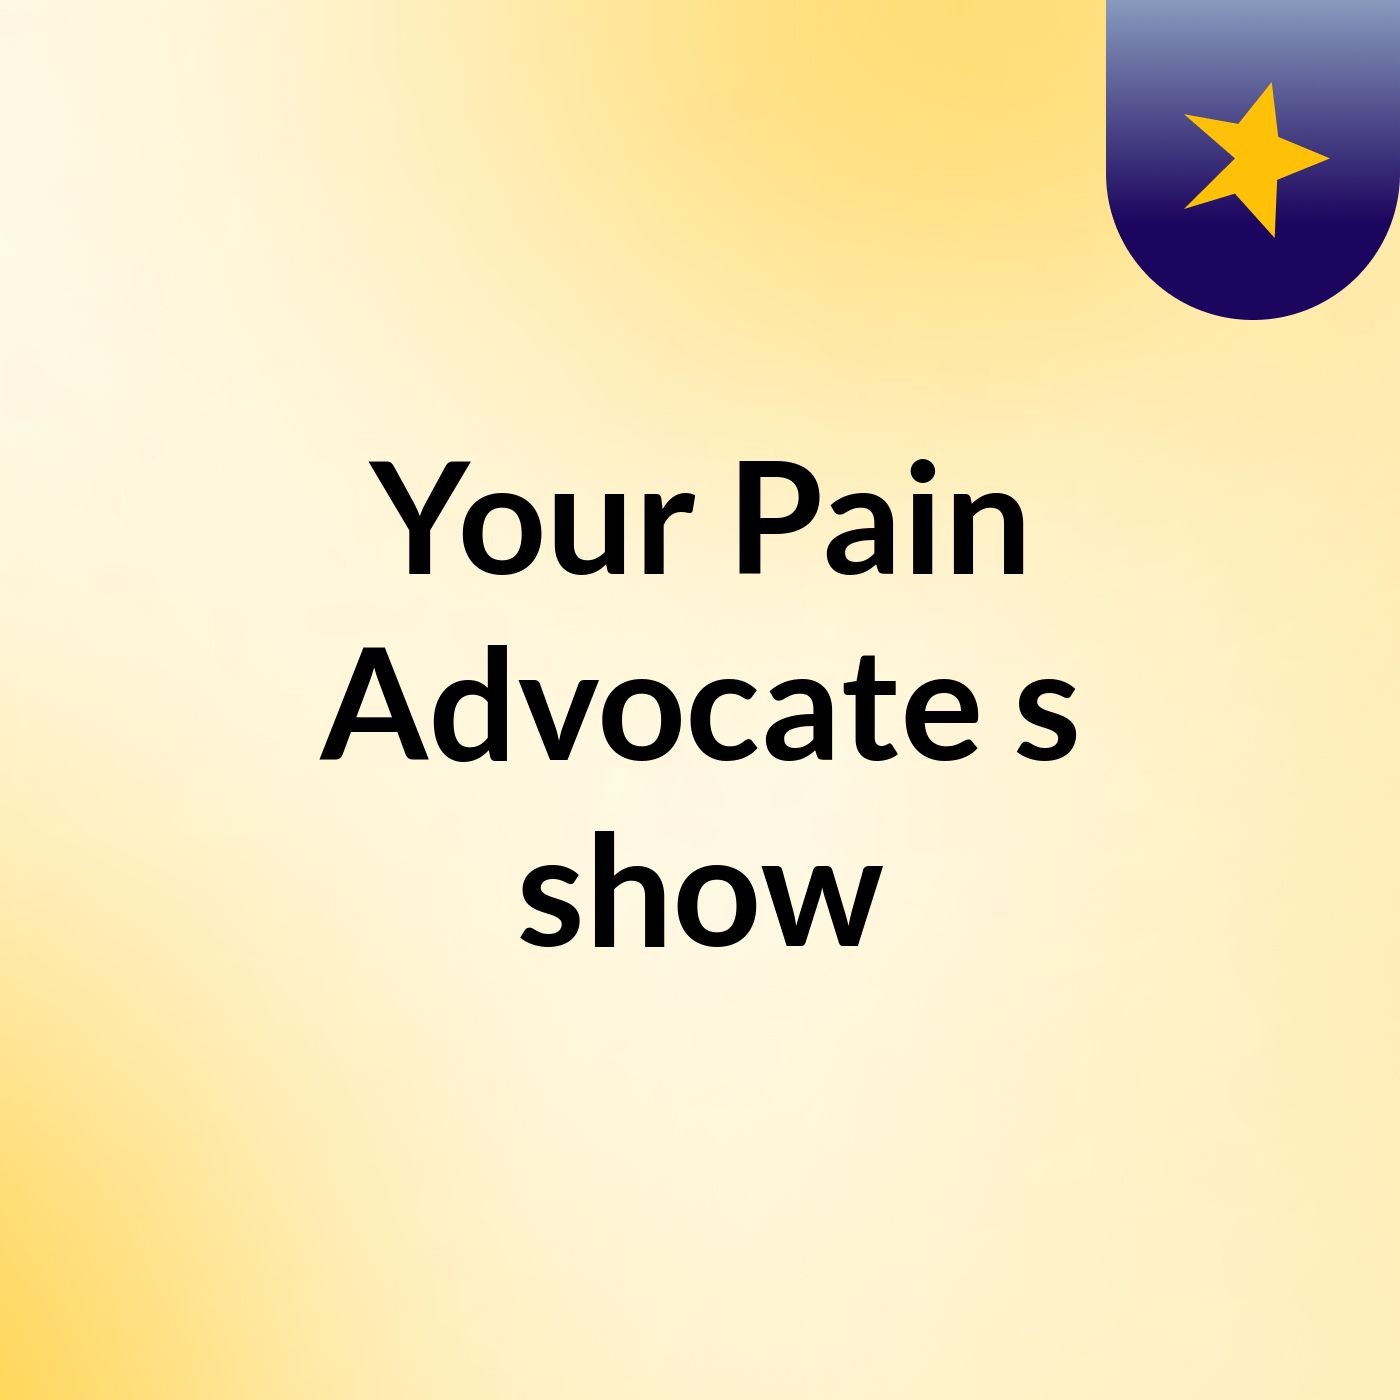 Your Pain Advocate's show